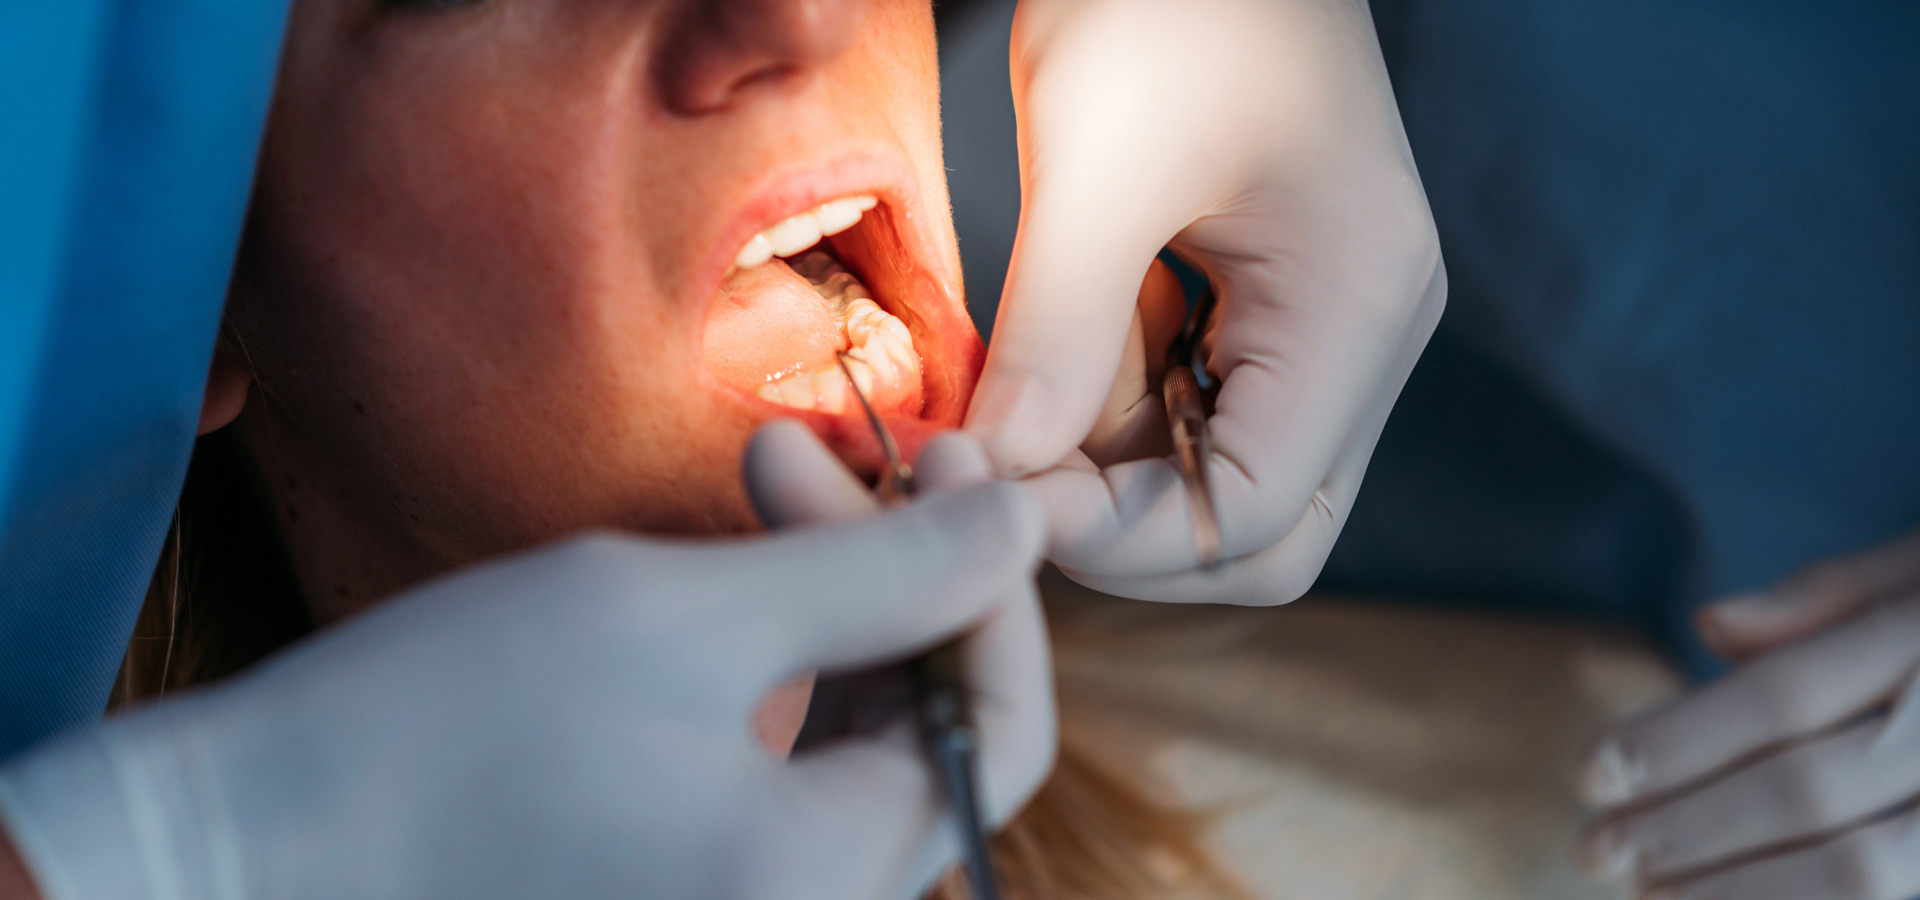 image of a dentist doing a dental exam on someone